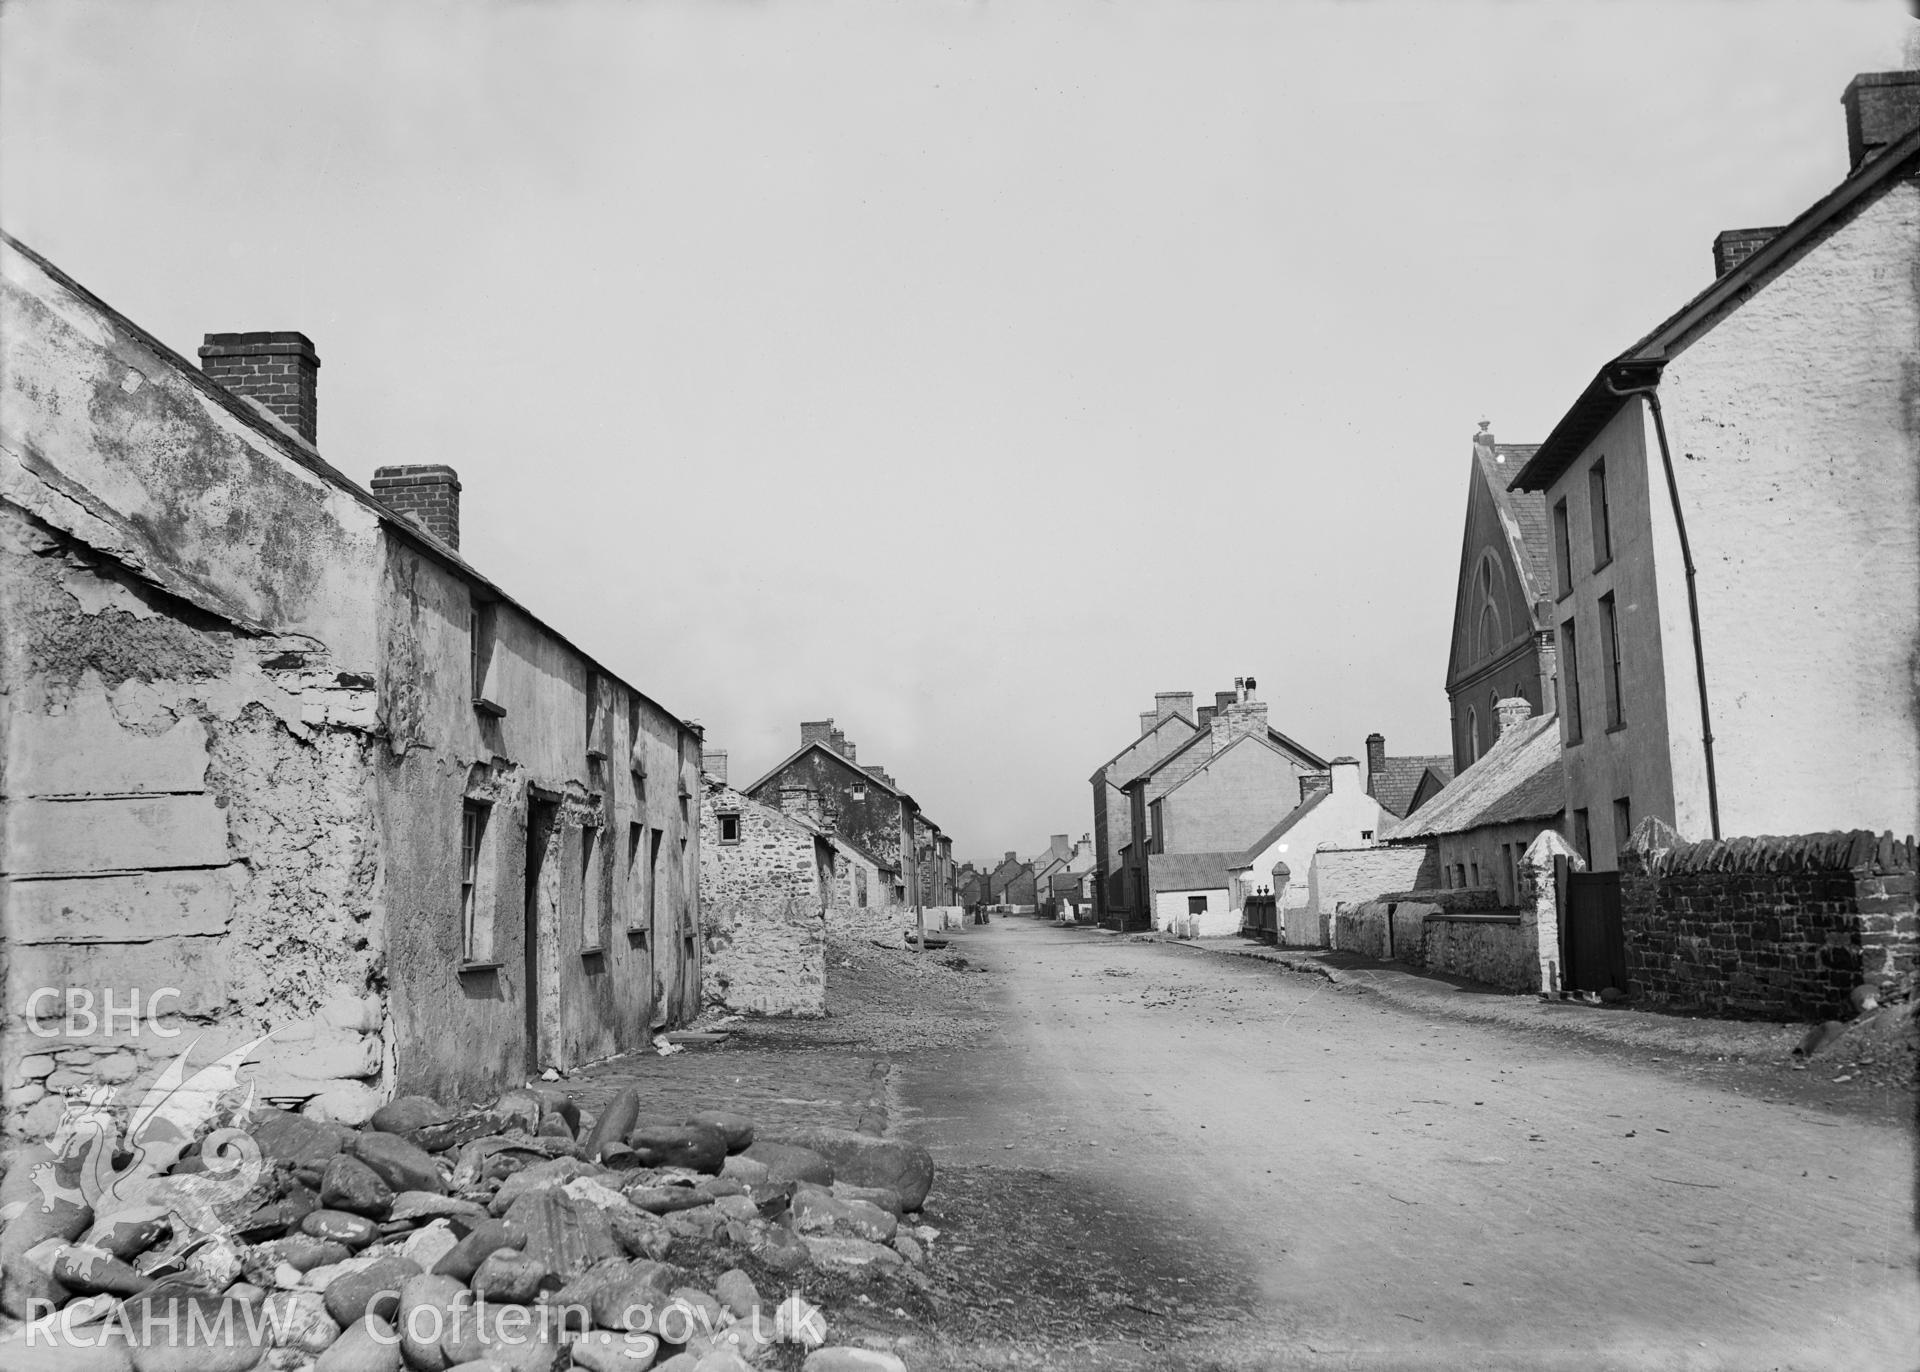 Black and white image dating from c.1910 showing the main street  in Borth.